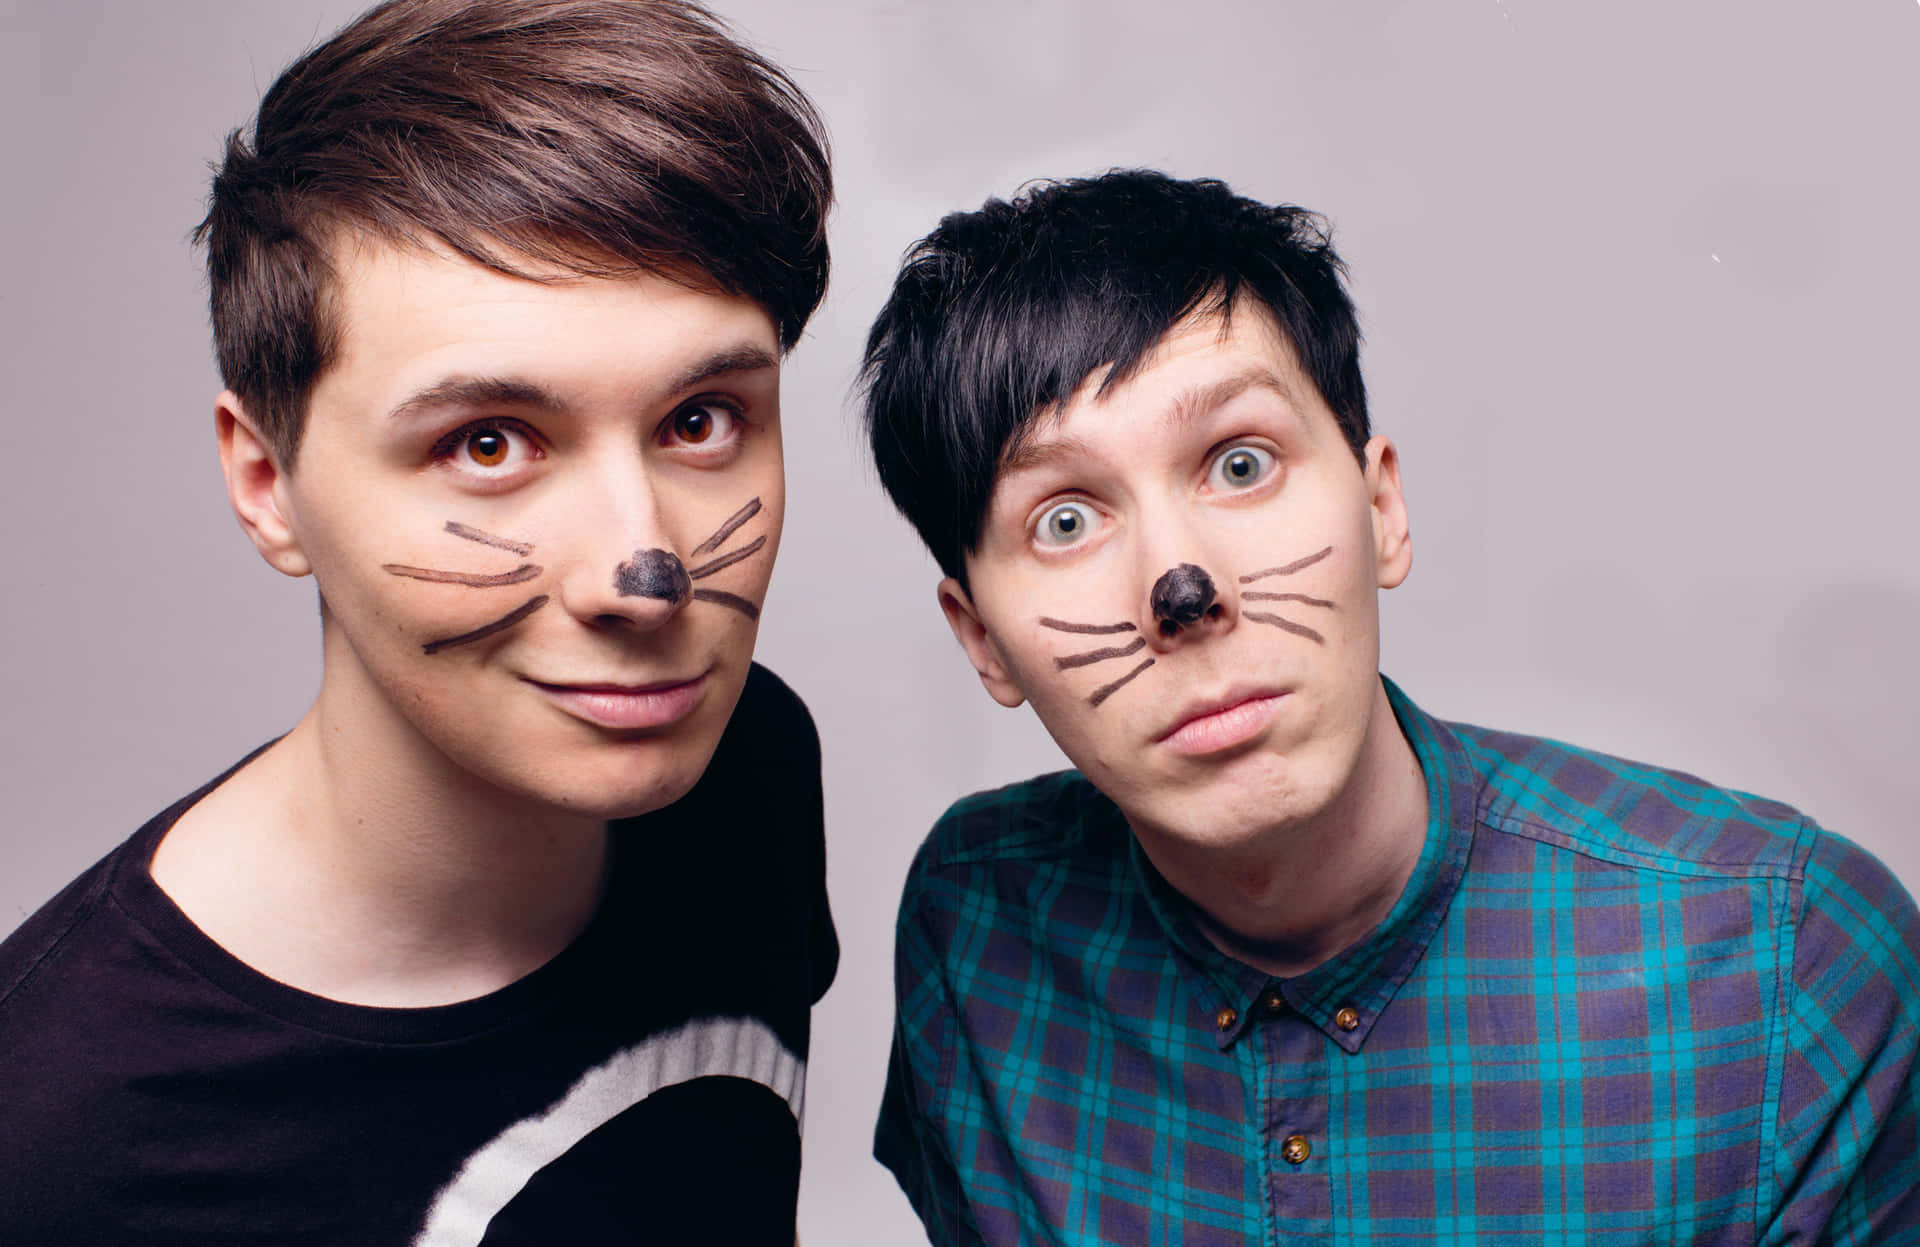 Dan Howell And Phil Lester, British Youtubers Background